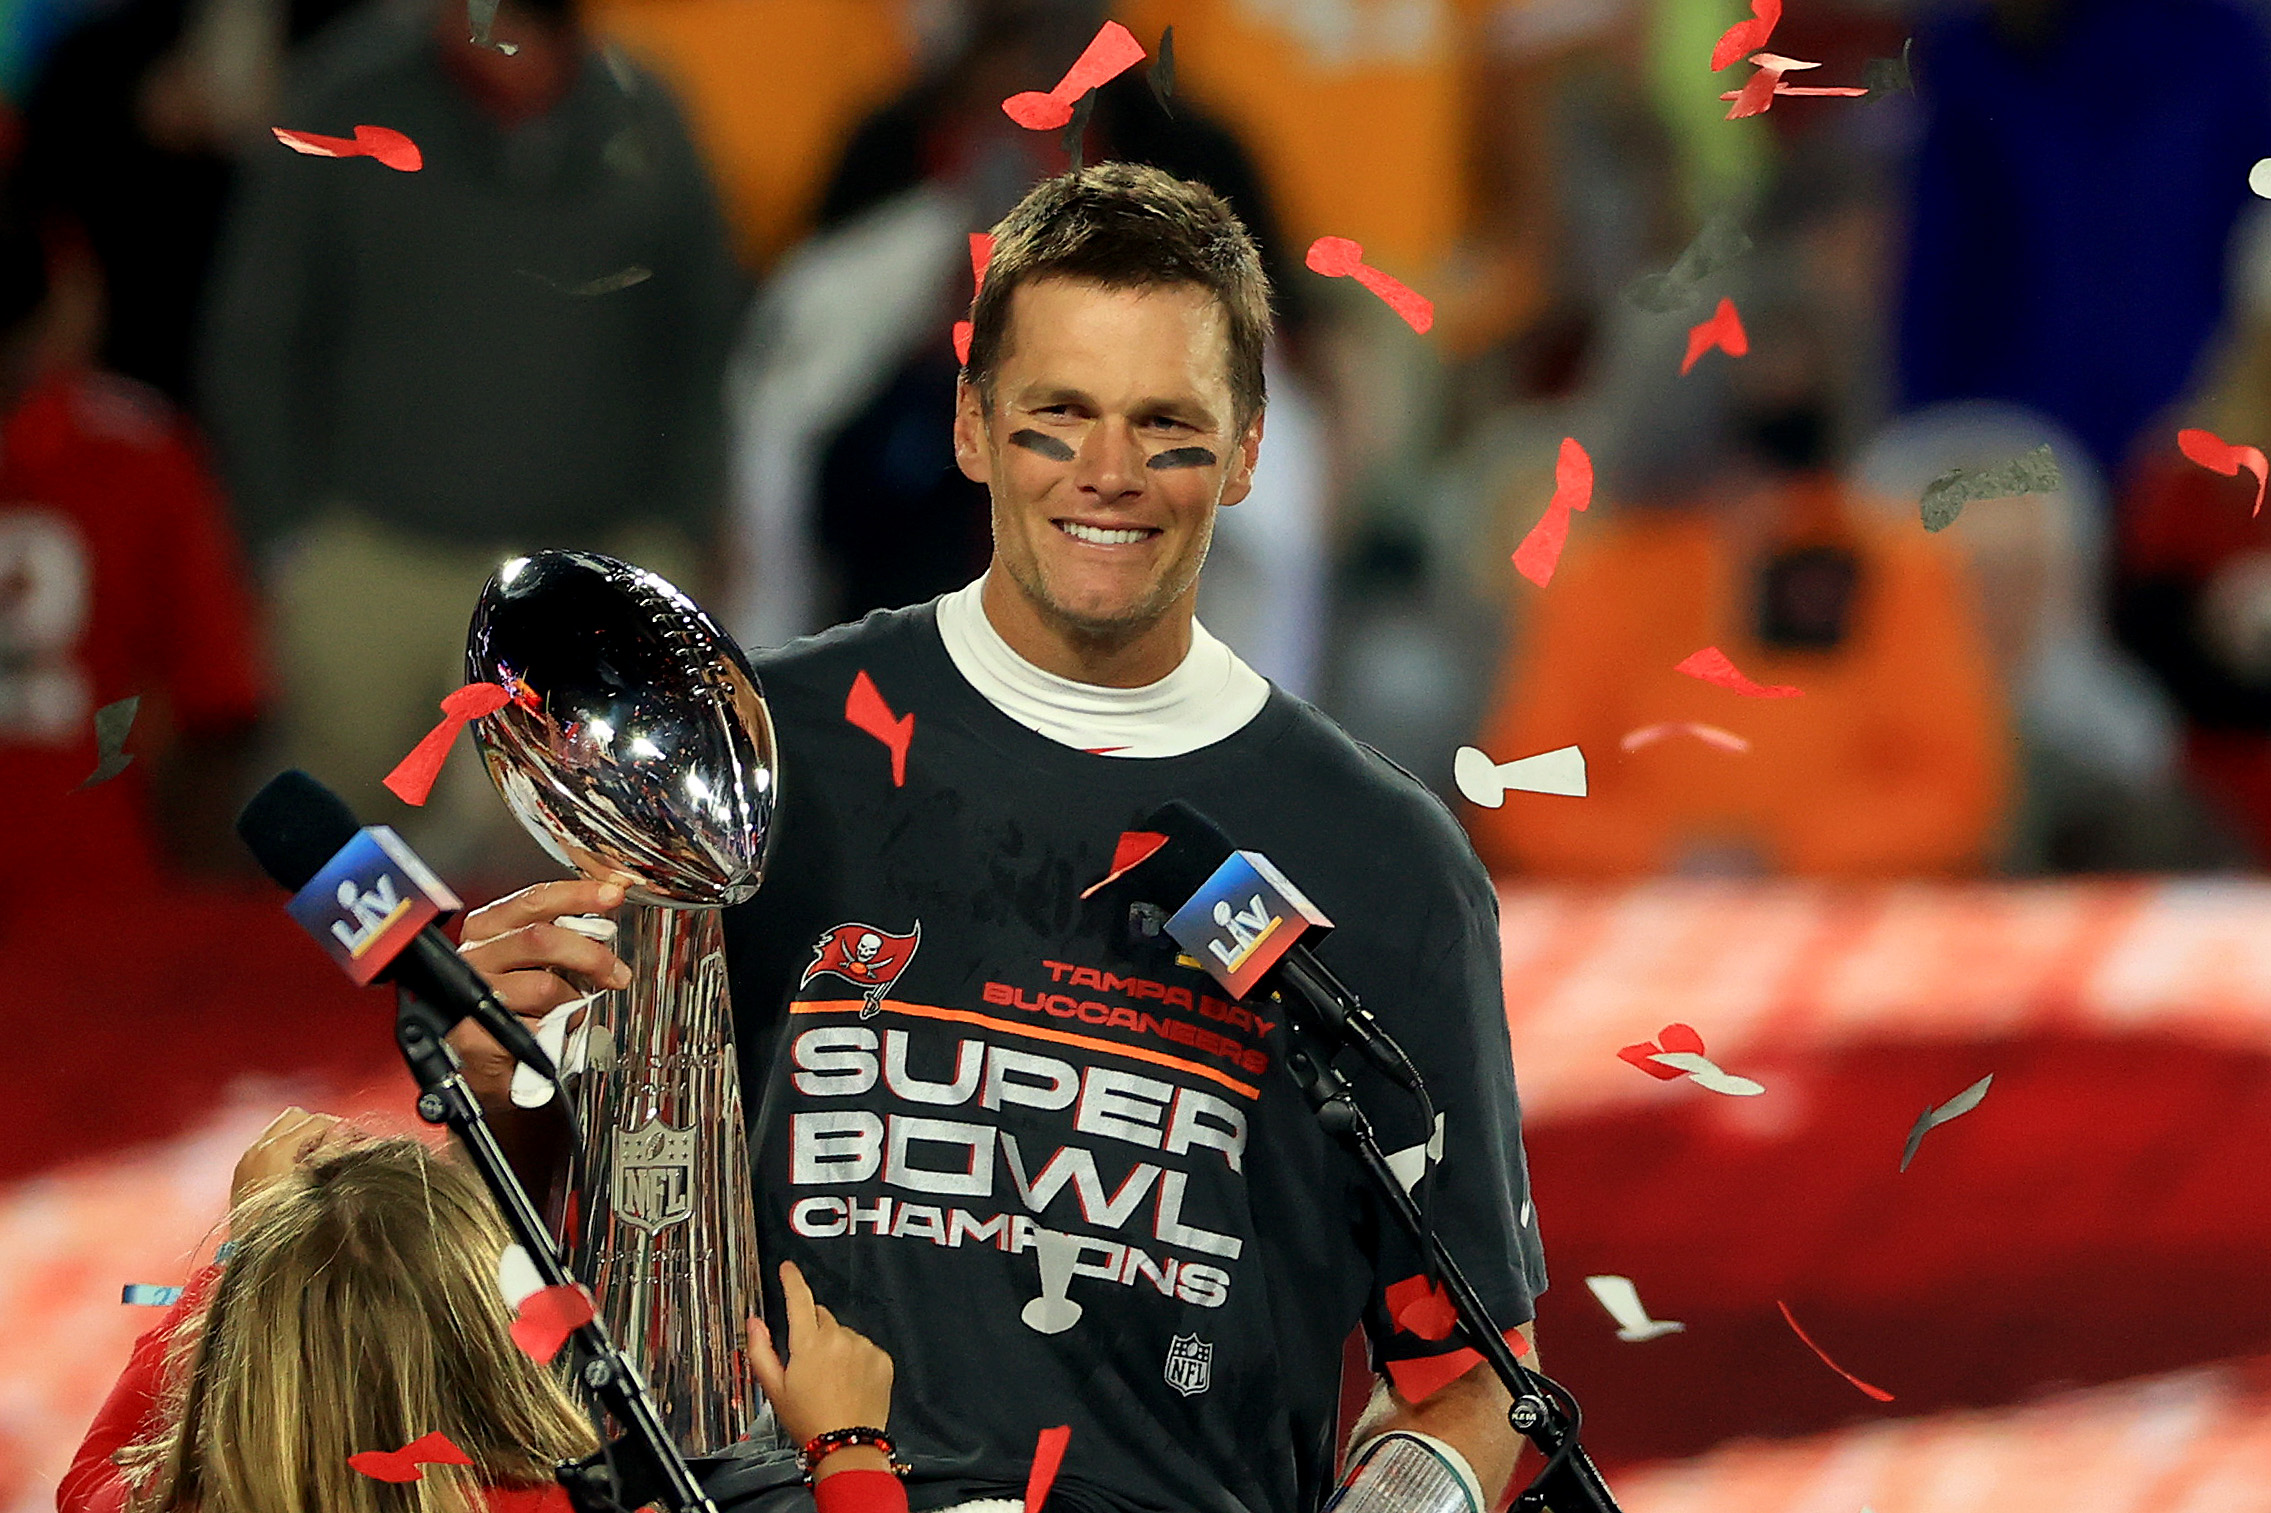 Tom Brady Caps First Season in Tampa Bay With 7th Super Bowl — and He's Not Done Winning